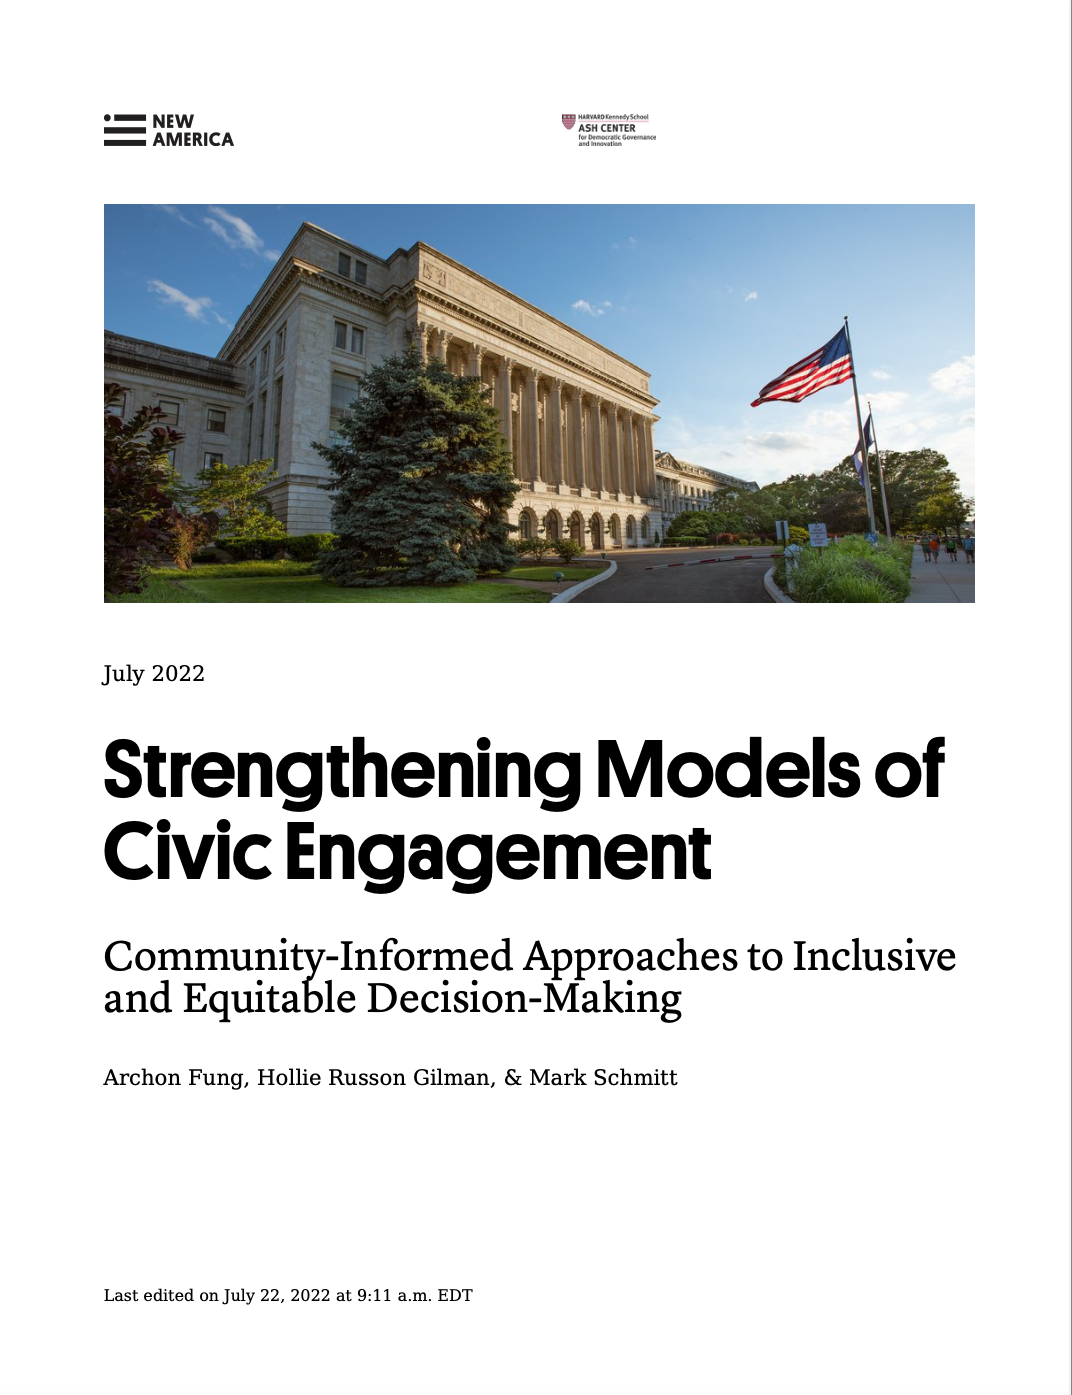 Strengthening Models of Civic Engagement: Community-Informed Approaches to Inclusive and Equitable Decision-Making